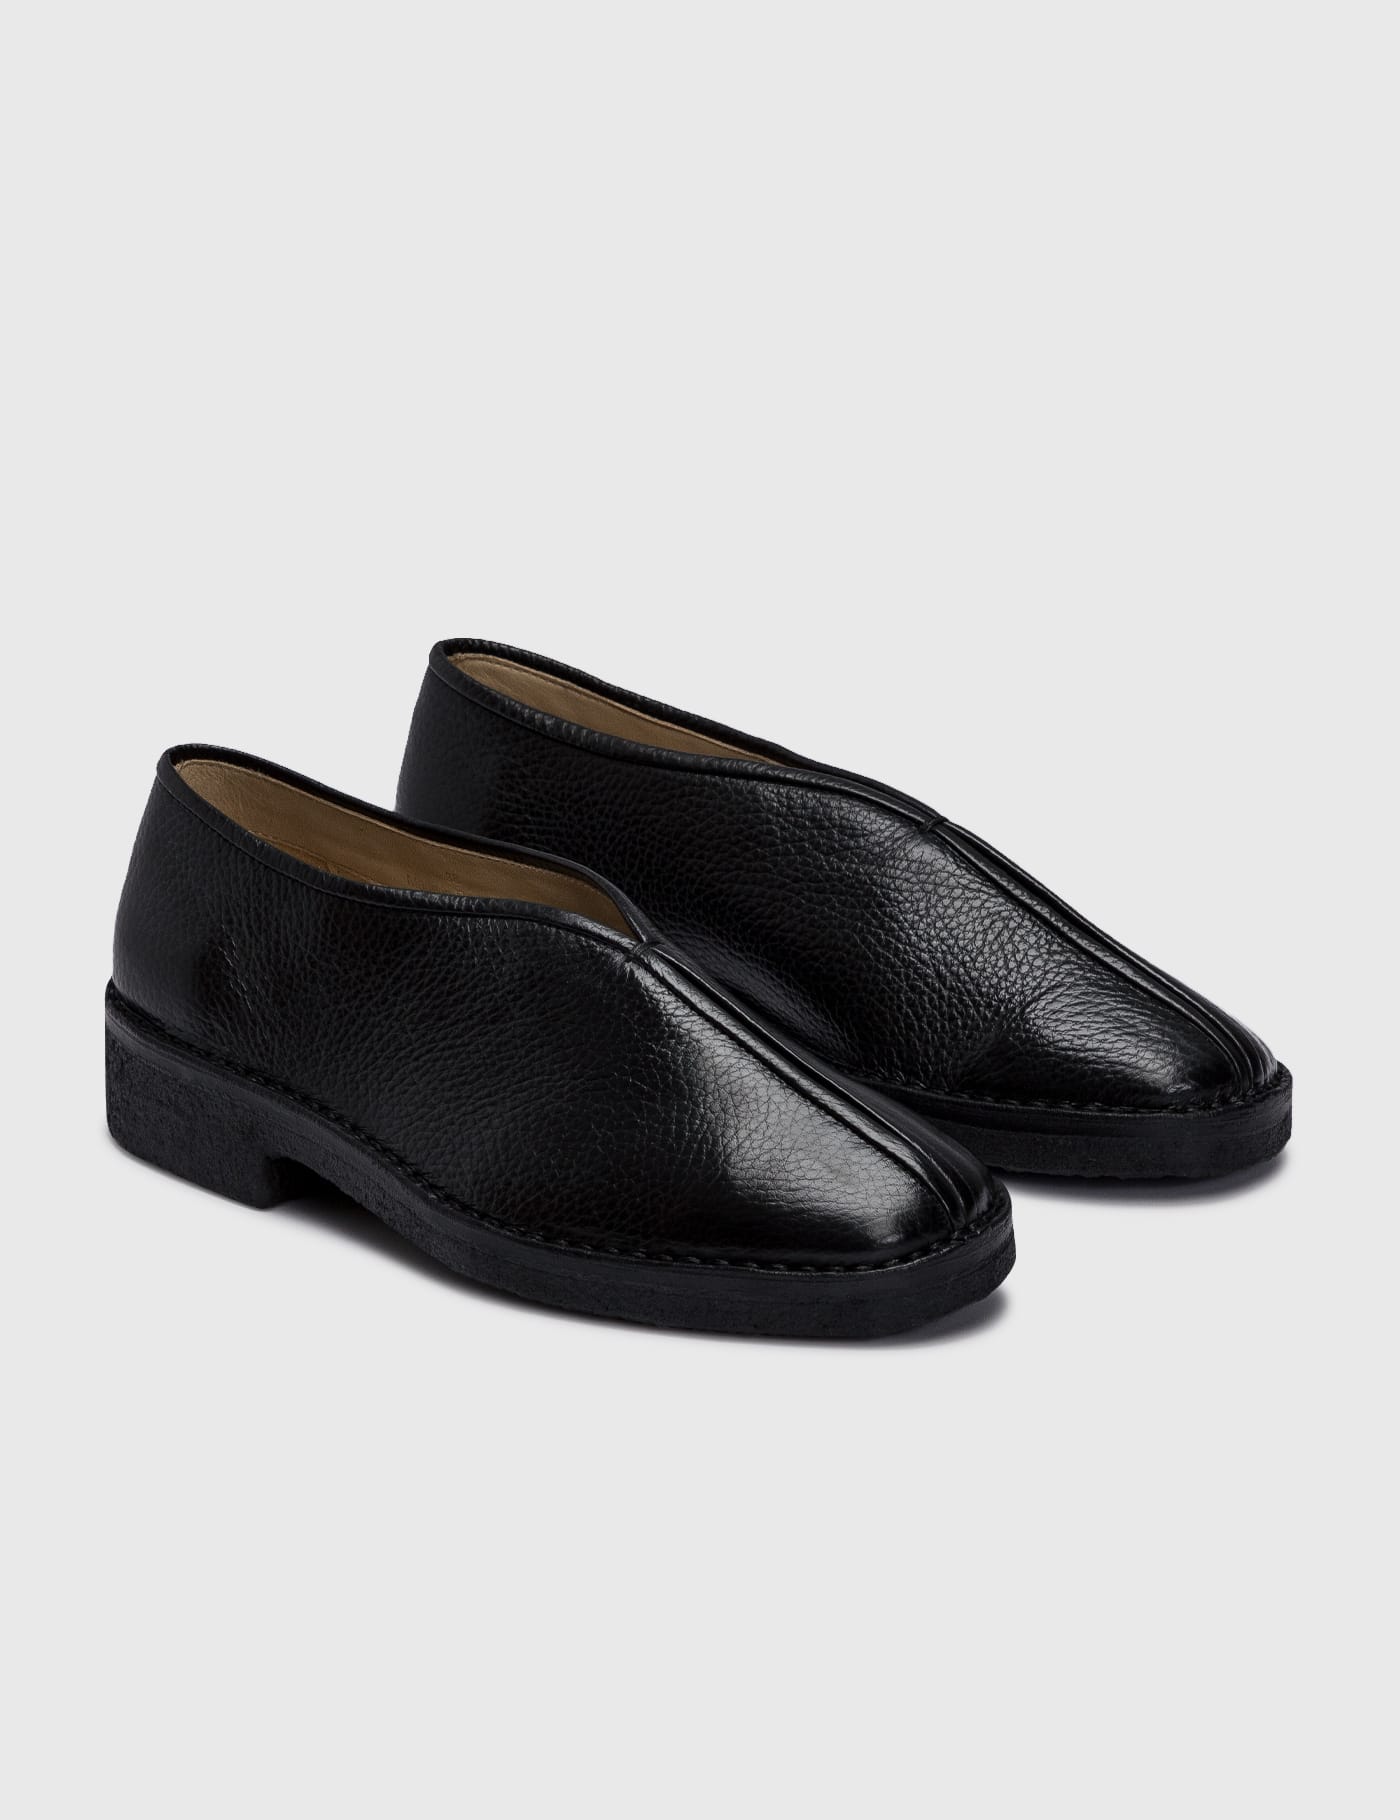 Lemaire - Piped Slipper | HBX - Globally Curated Fashion and 